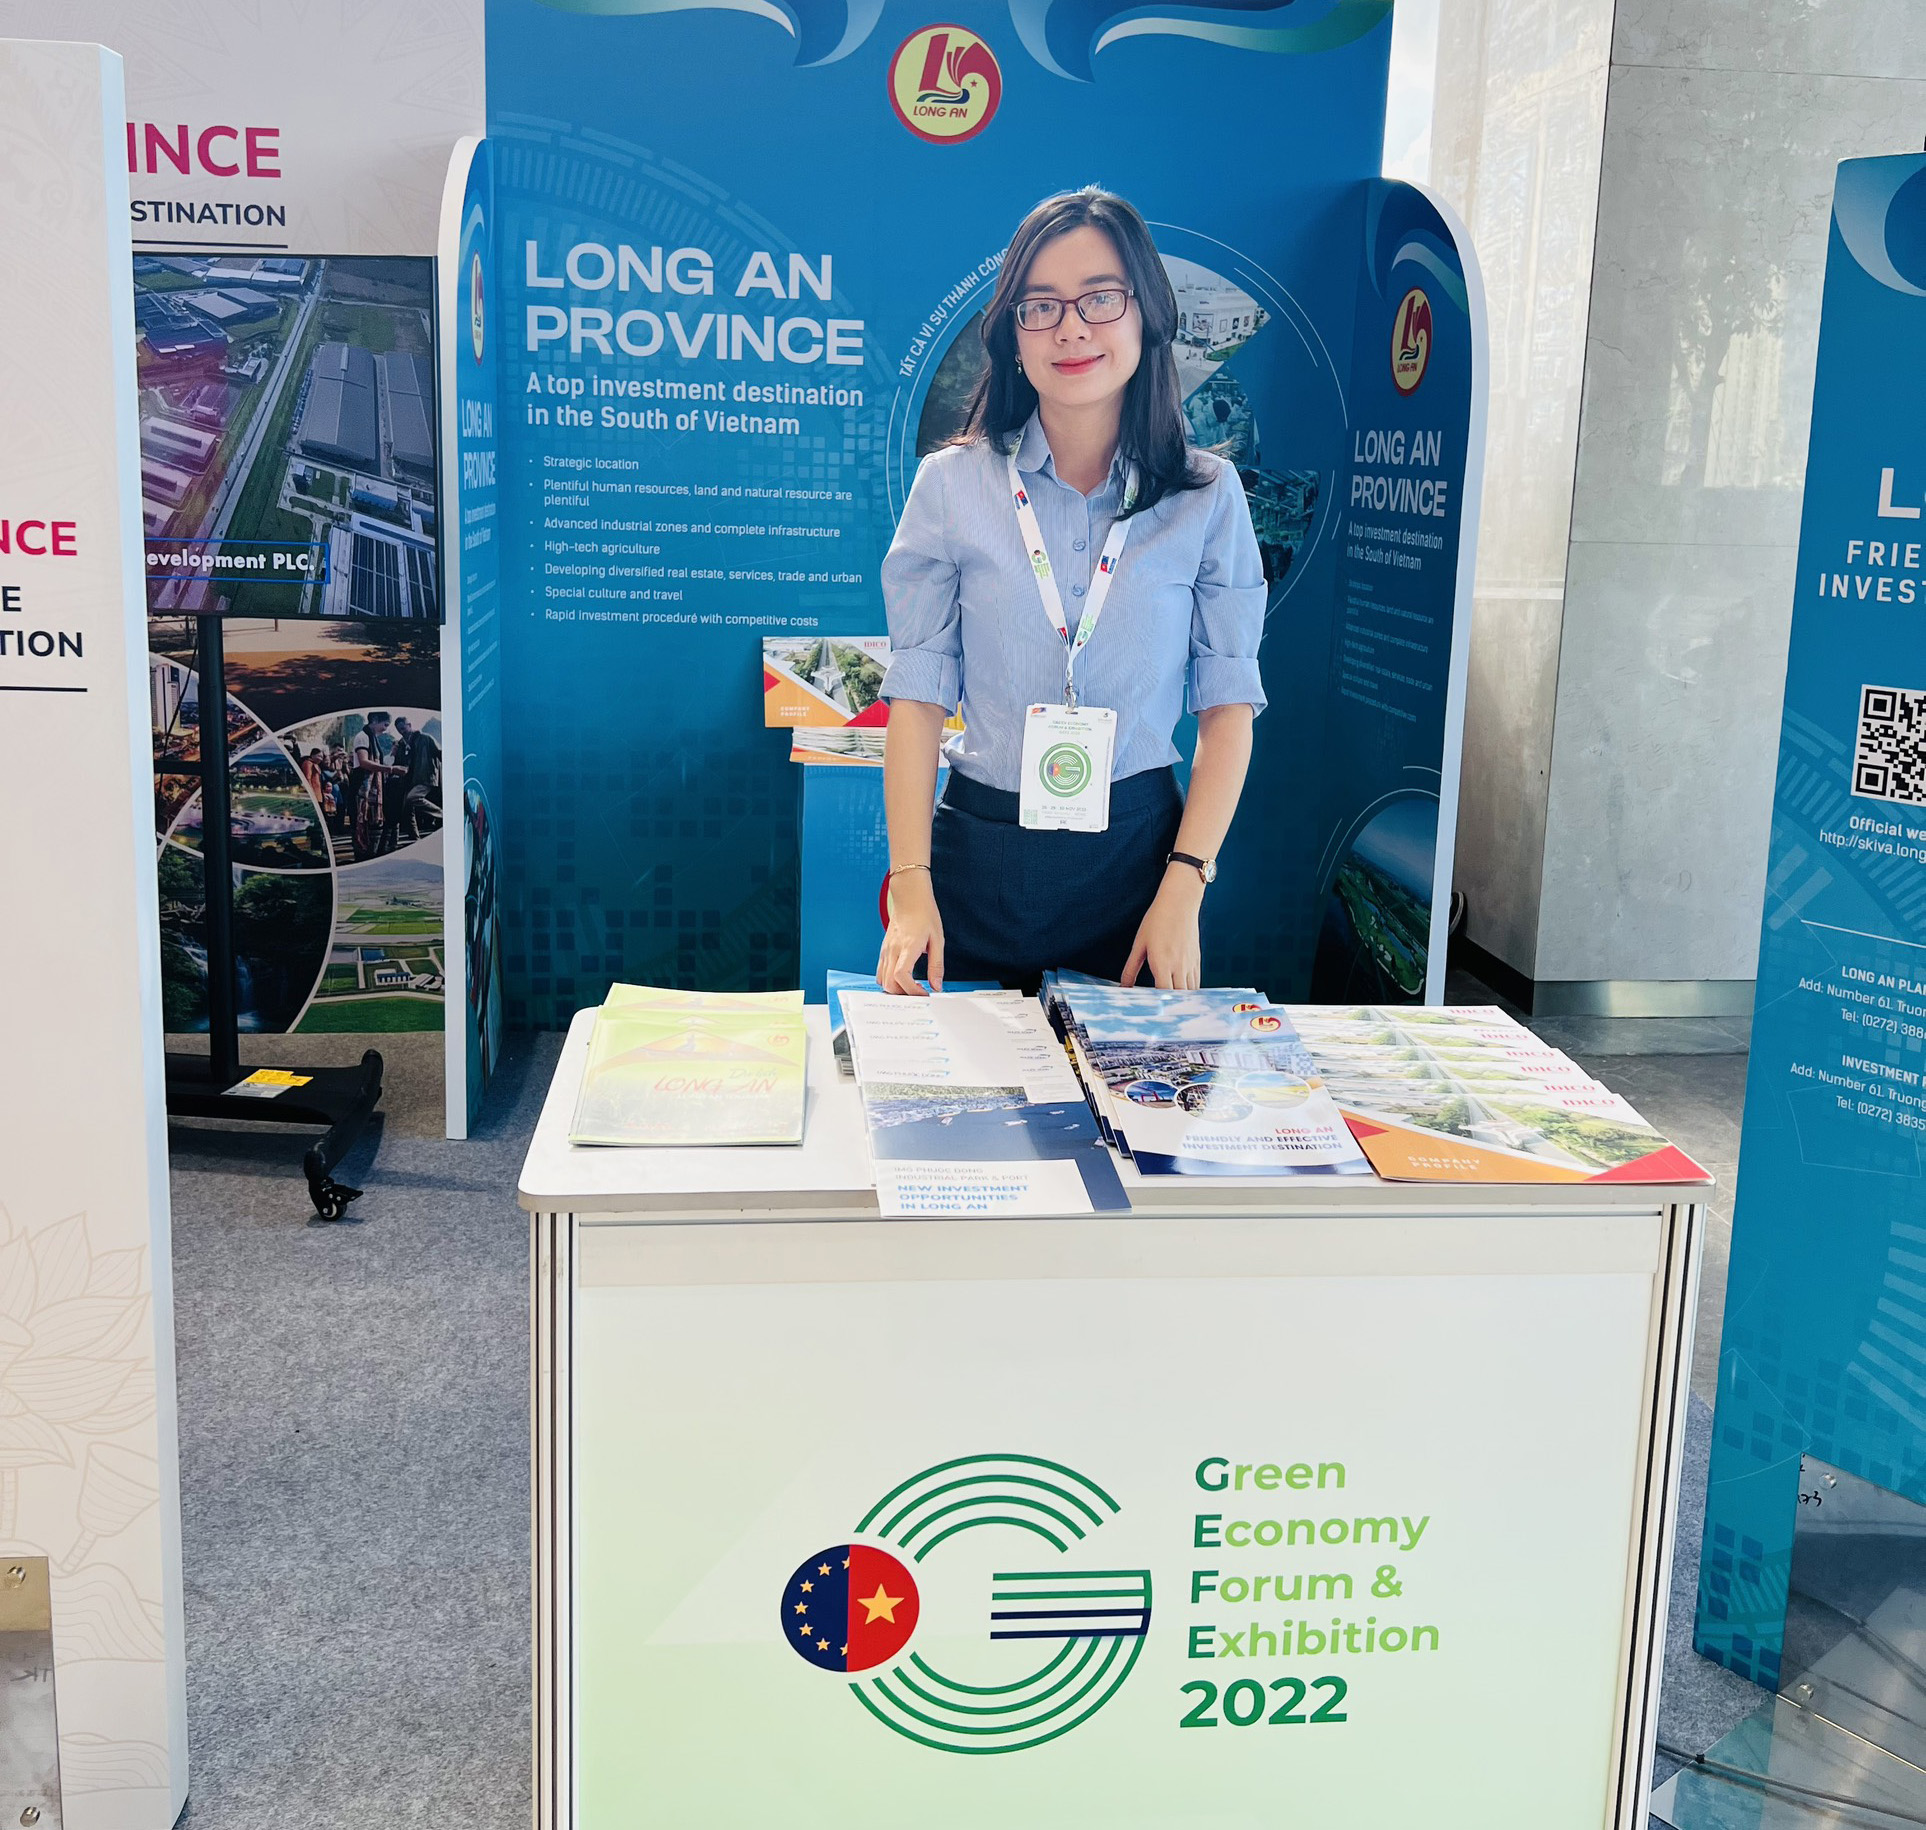 phuoc dong industrial park   port attends green economy exhibition in 2022